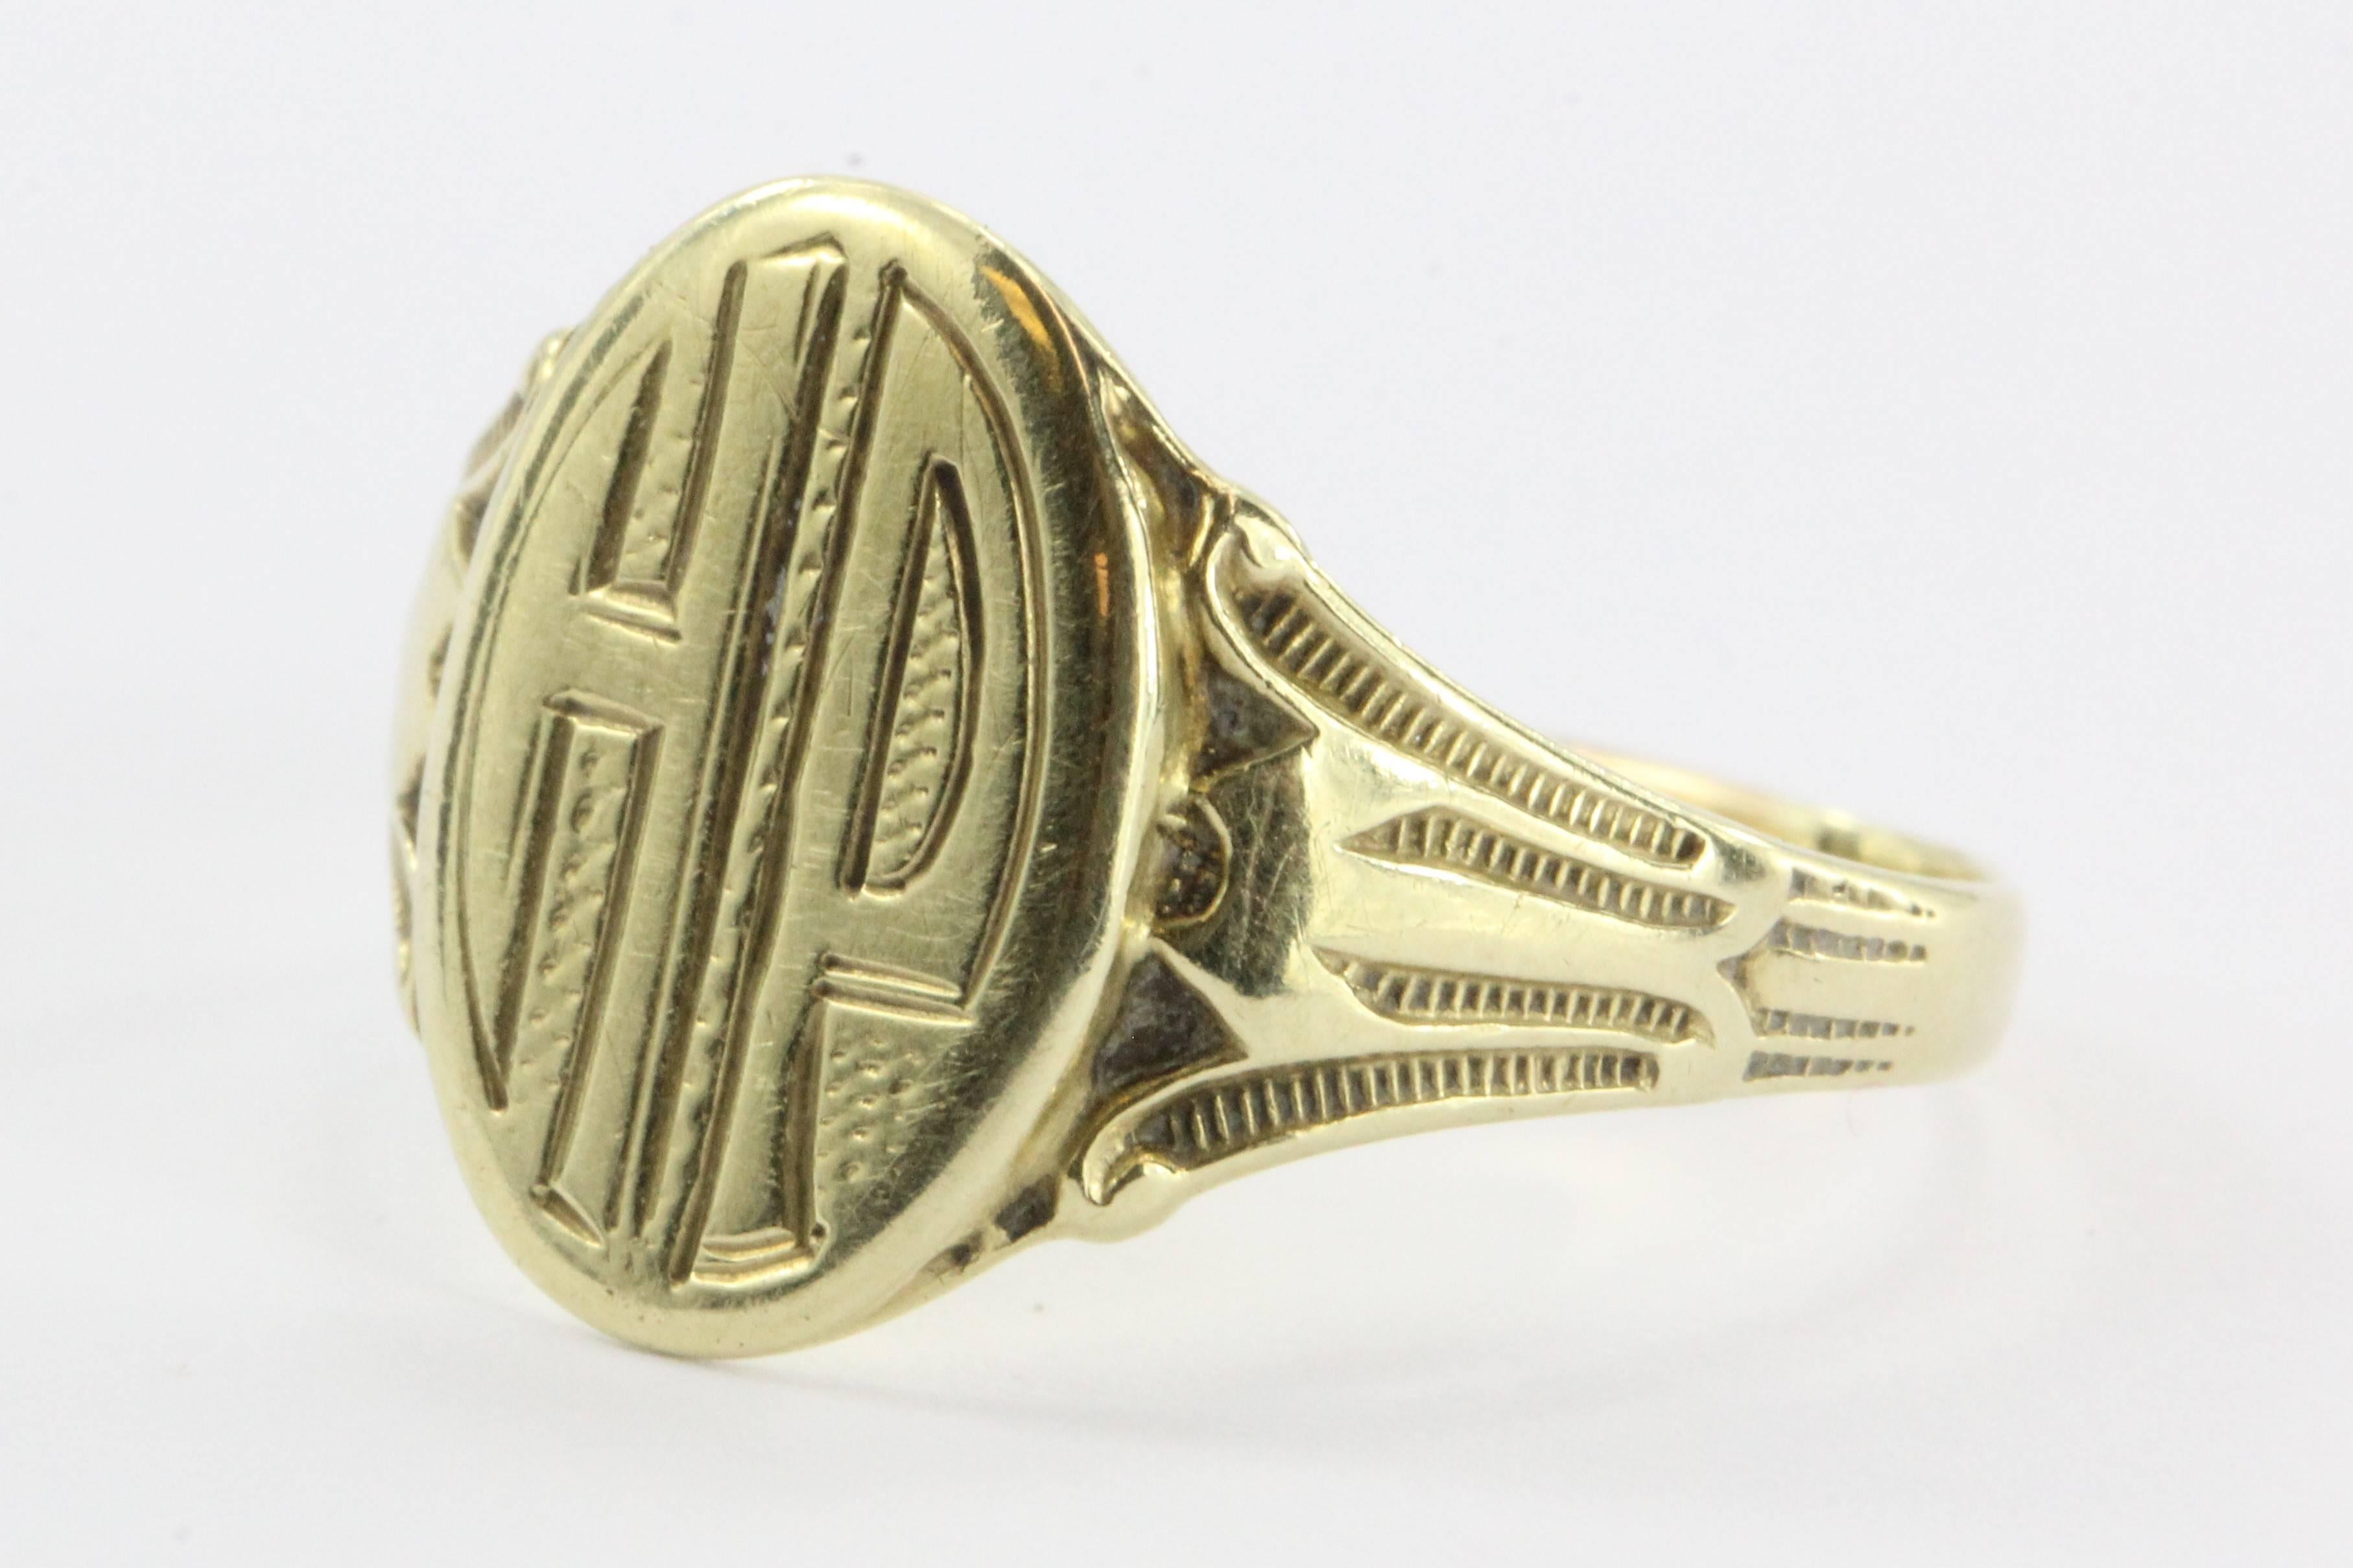 Antique 14K Gold Ostby & Barton Gothic Signet Ring HP. The ring is in excellent estate condition and ready to wear. It is signed 14K O.B.. The front is monogrammed HP. 

The ring is a size 8.5 - 8.75 and weighs a total of 3 grams